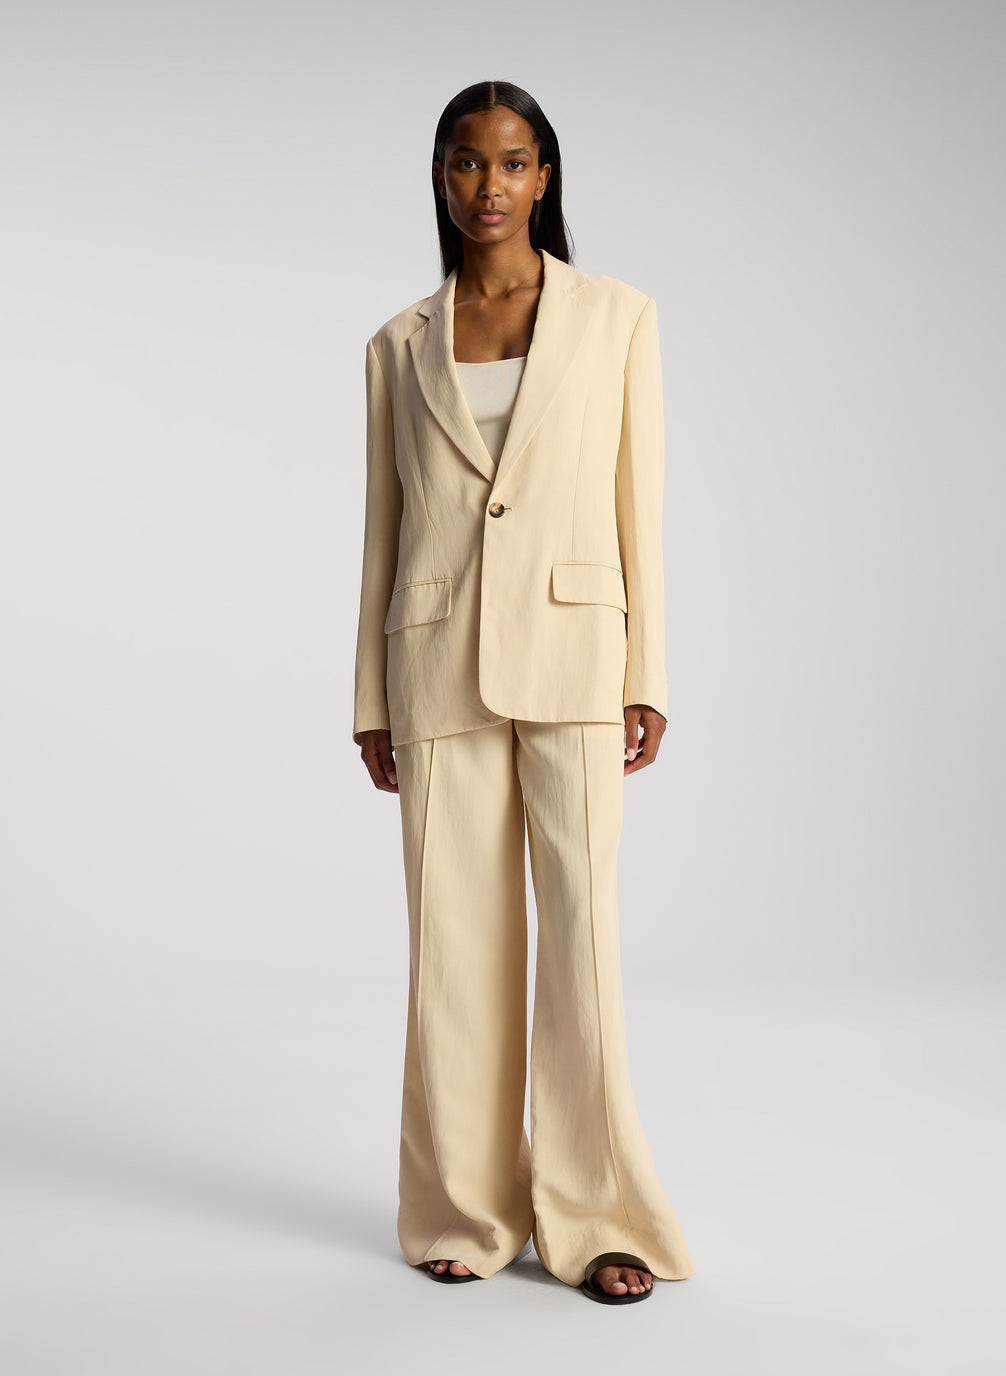 front view of woman wearing cream blazer and matching wide leg pants